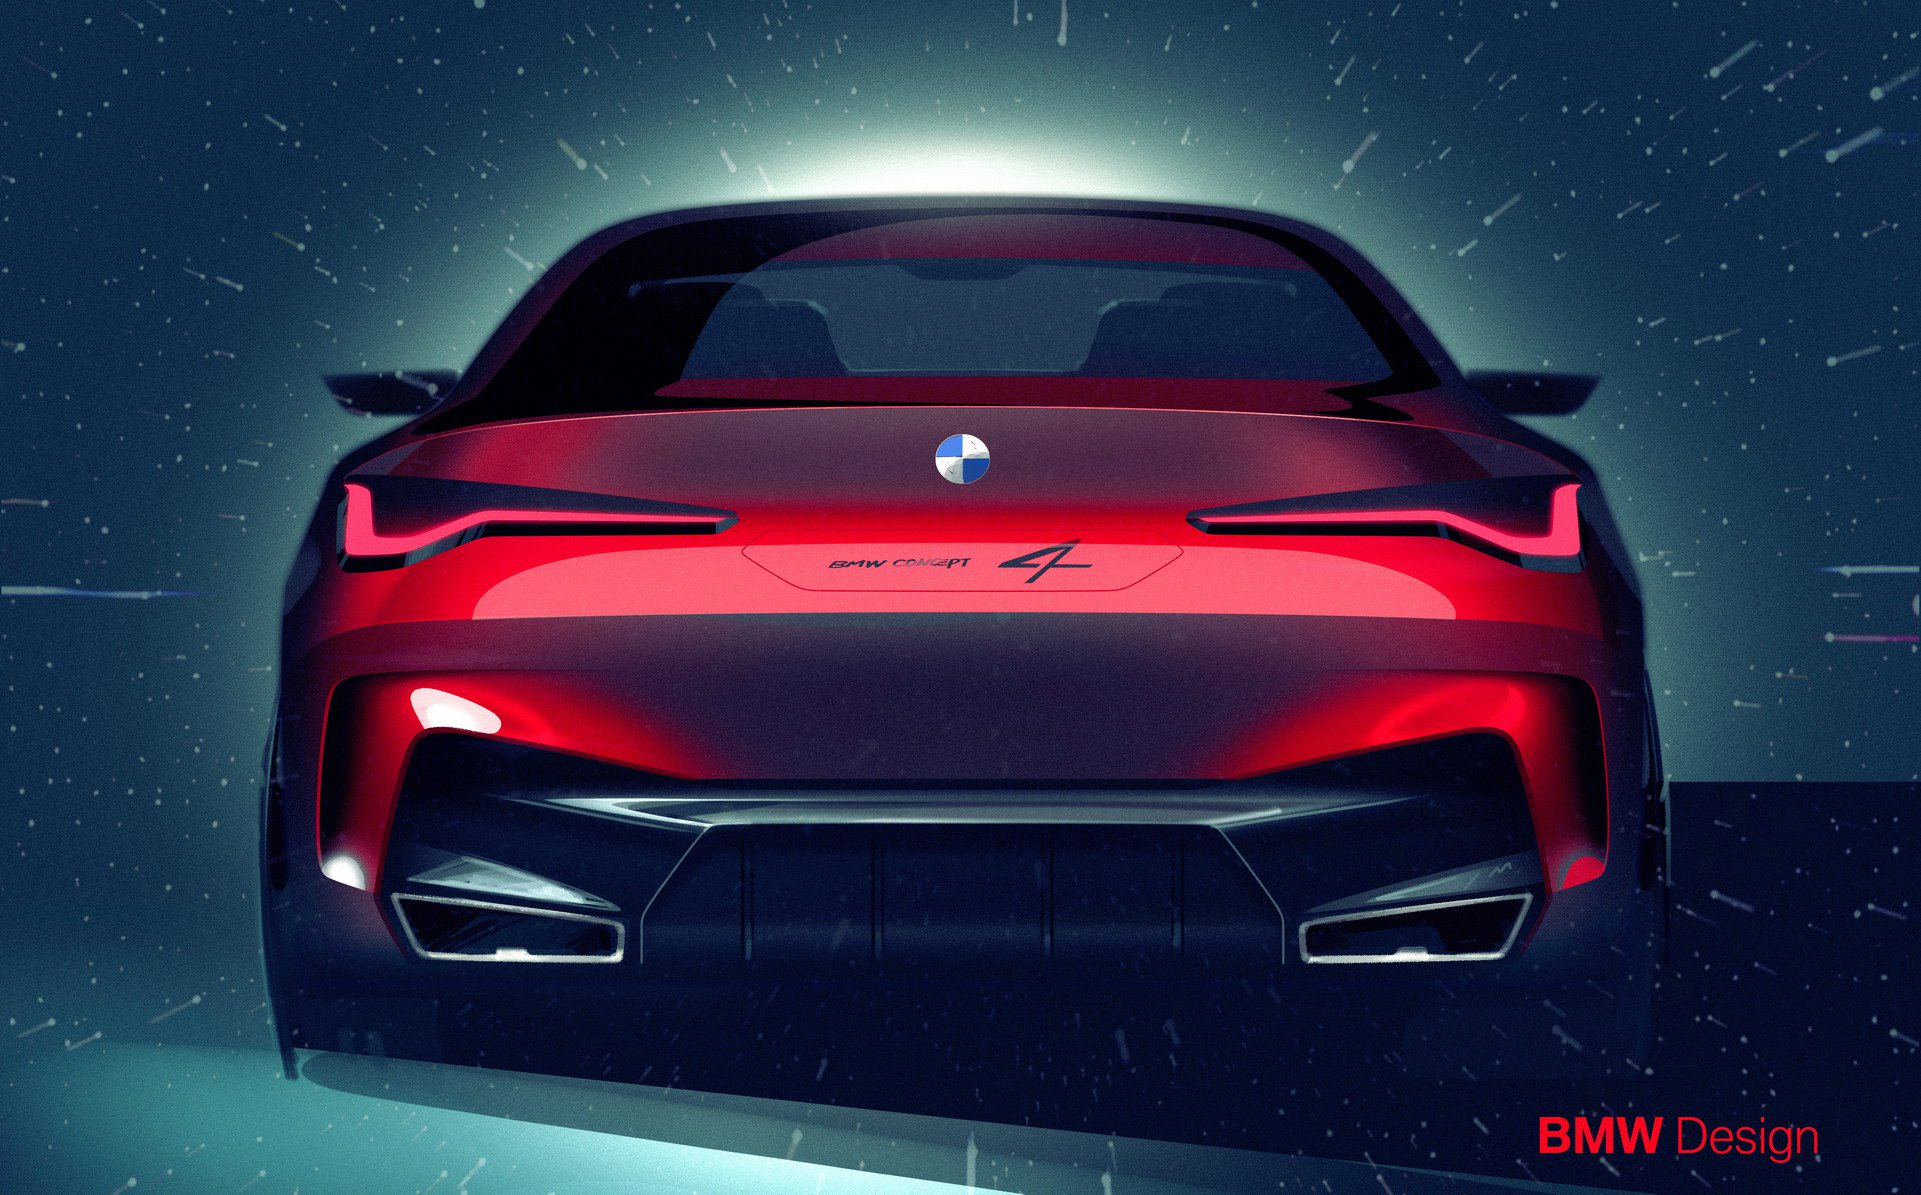 A Vision Of Luxury And Performance: The 2019 BMW Concept 4